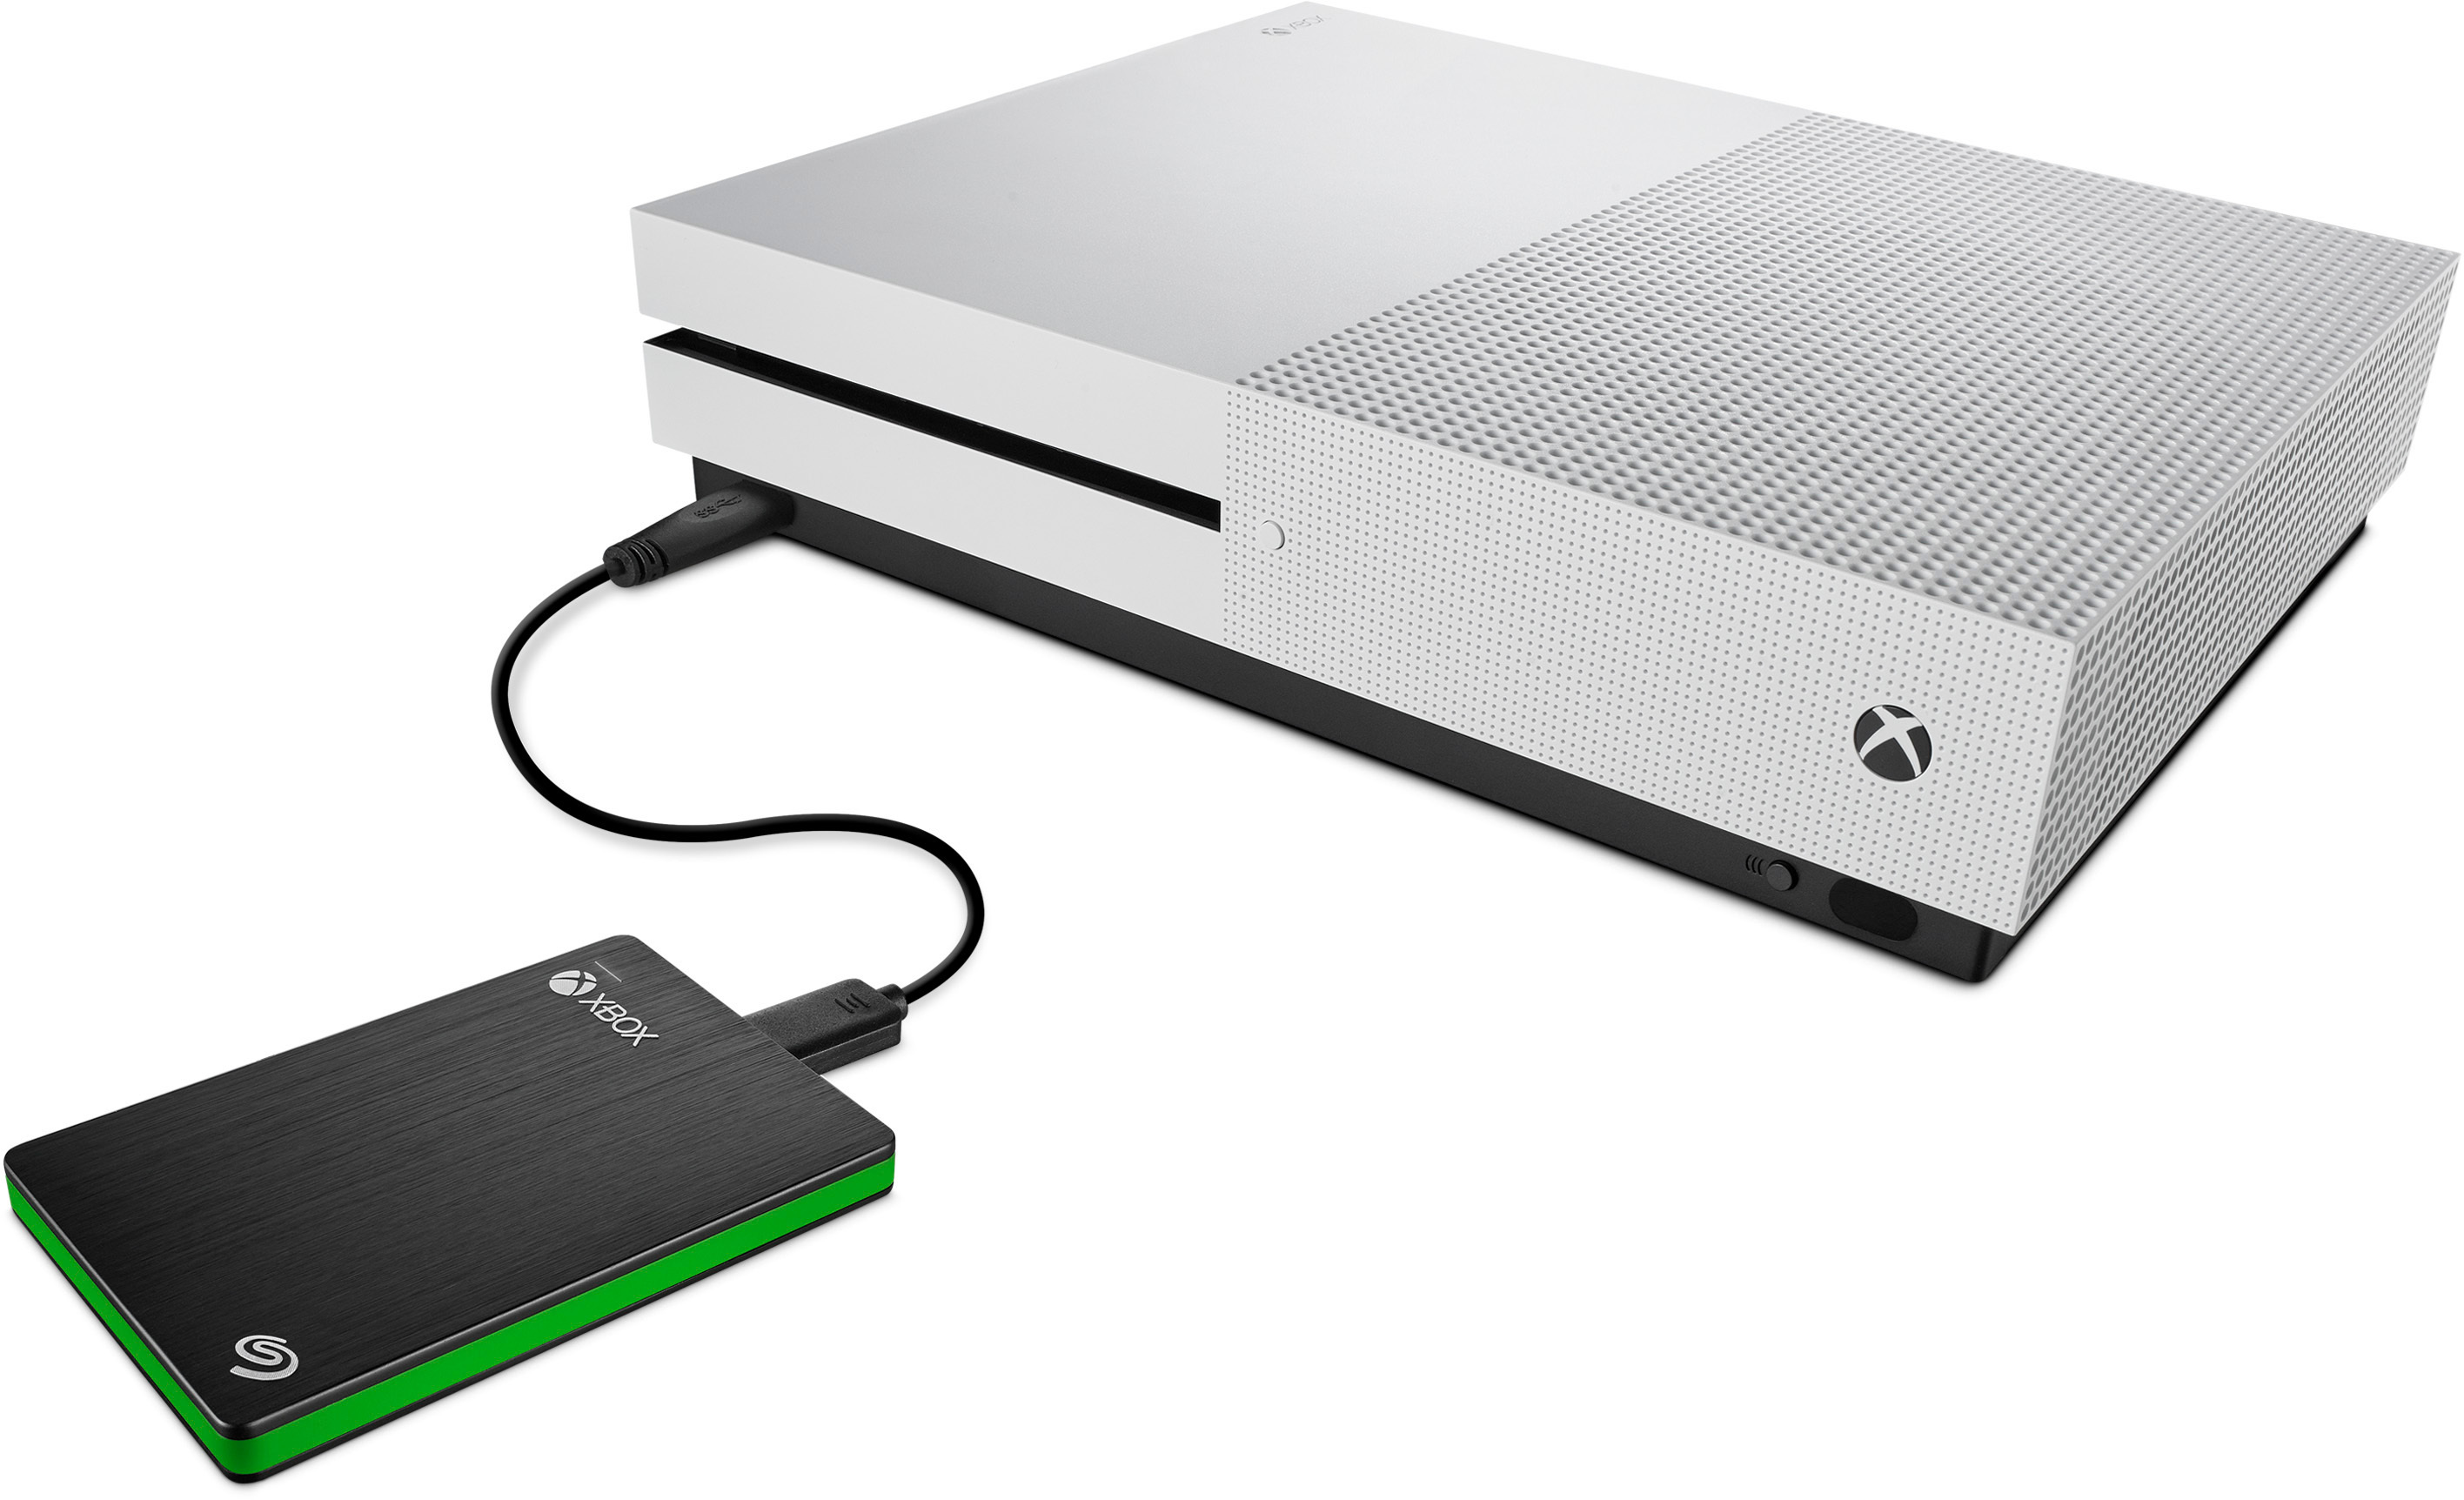 Xbox Series X expandable storage coming with Seagate's custom 1TB